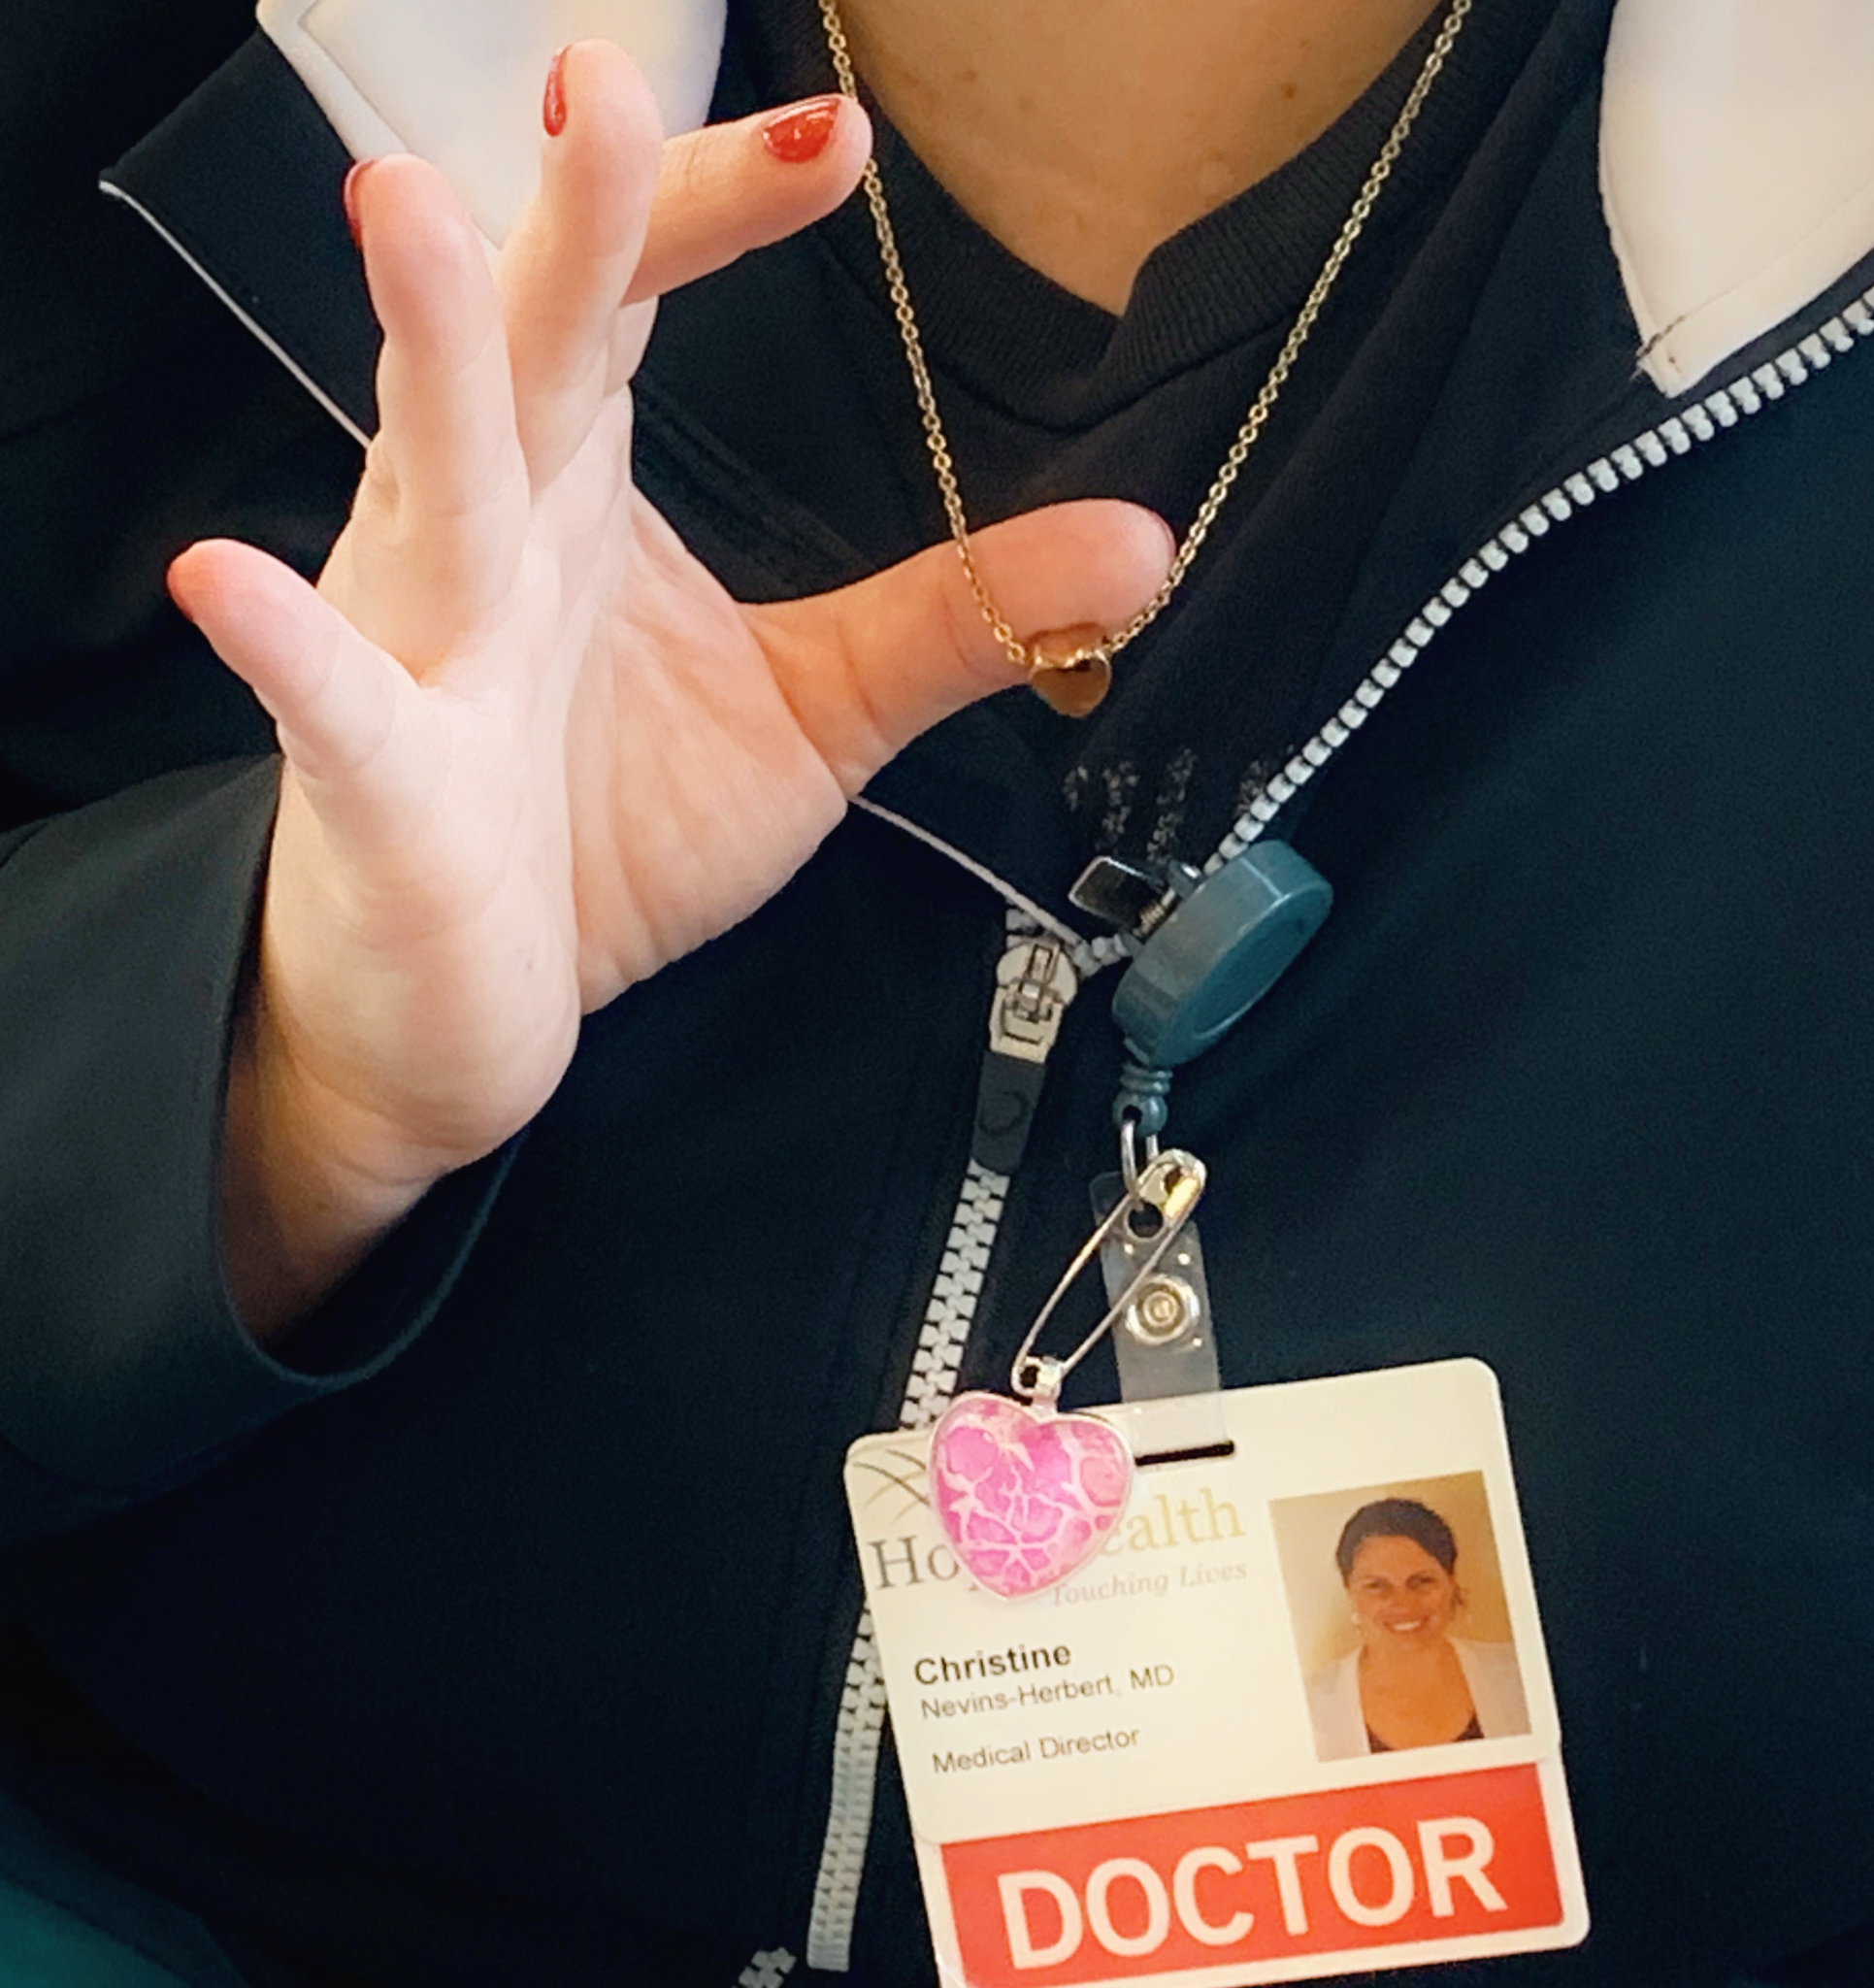 Woman with doctor badge shows off heart necklace